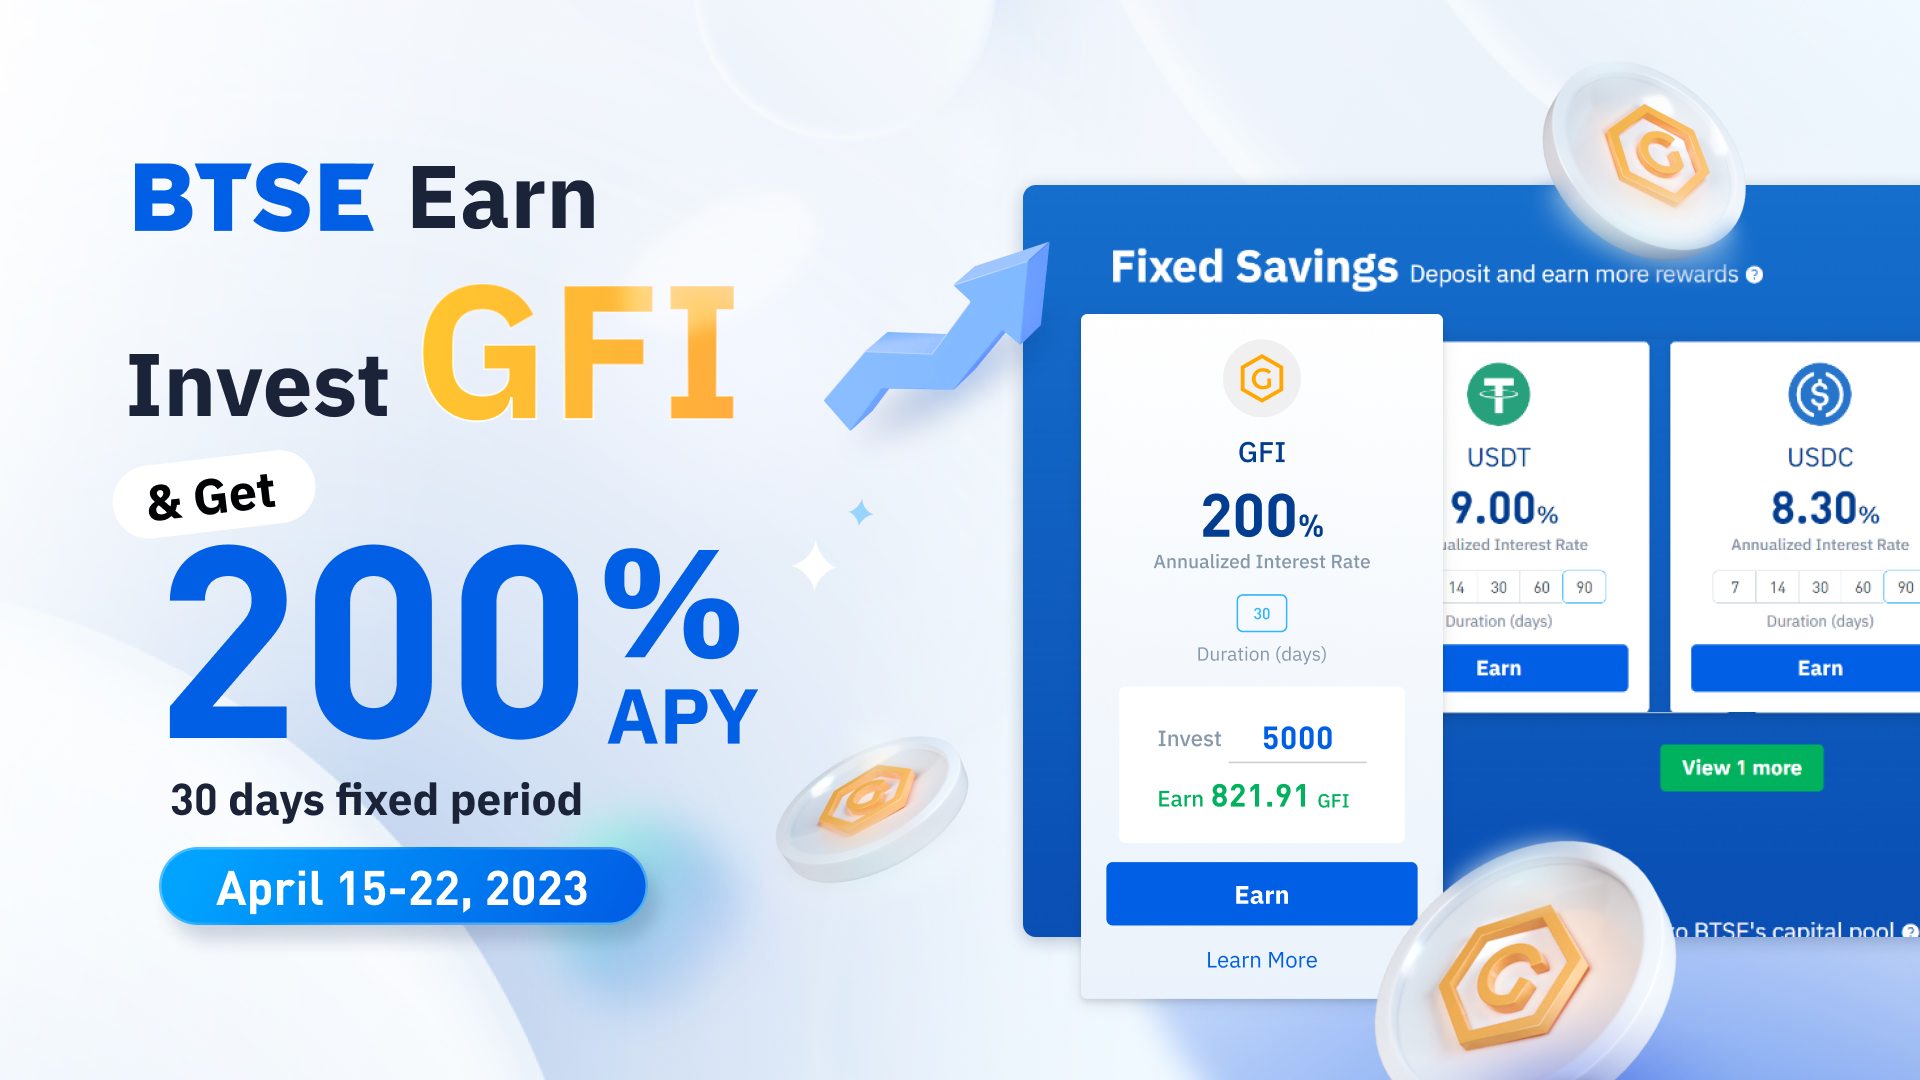 Exclusive Opportunity: Earn 200% APY on GFI with BTSE Earn!